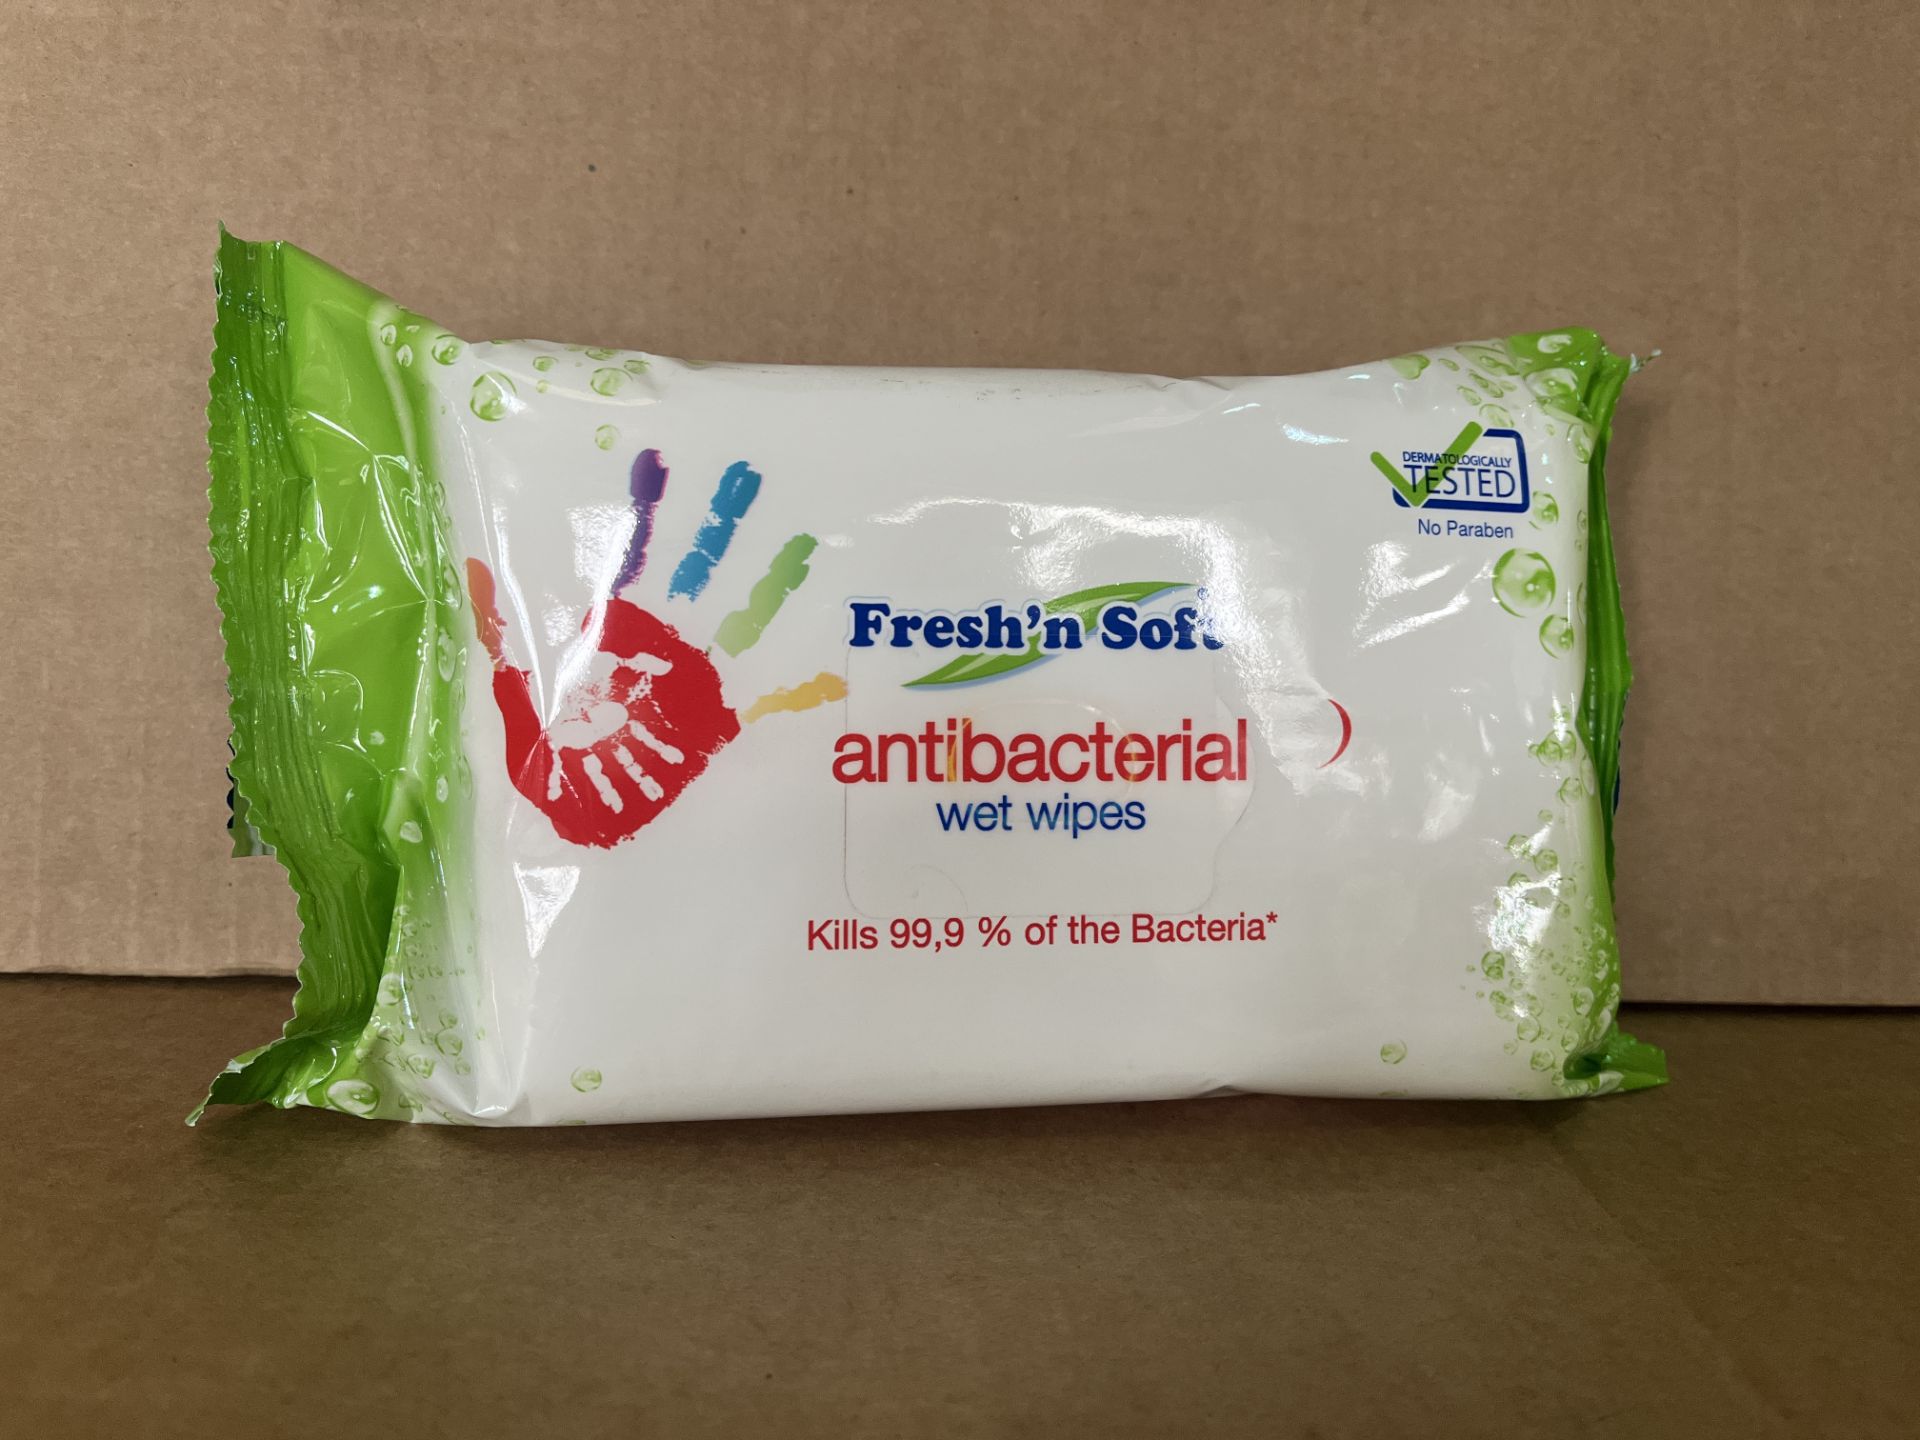 96 X BRAND NEW PACKS OF FRESH AND SOFT ANTIBACTERIAL WET WIPES R15